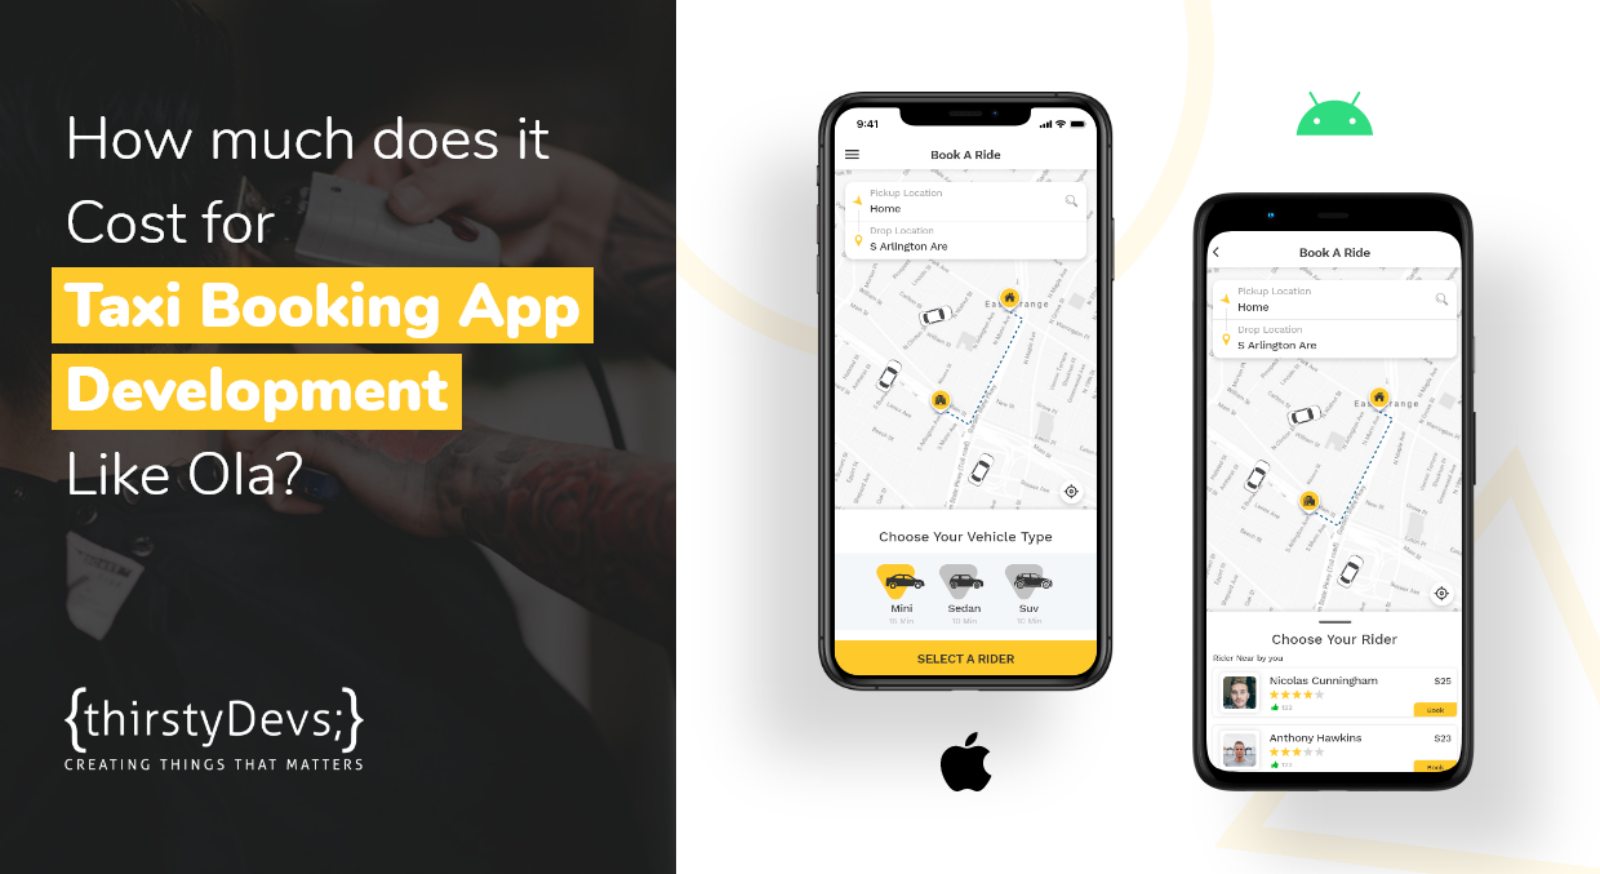 How much does it Cost for Taxi Booking App Development Like Ola?